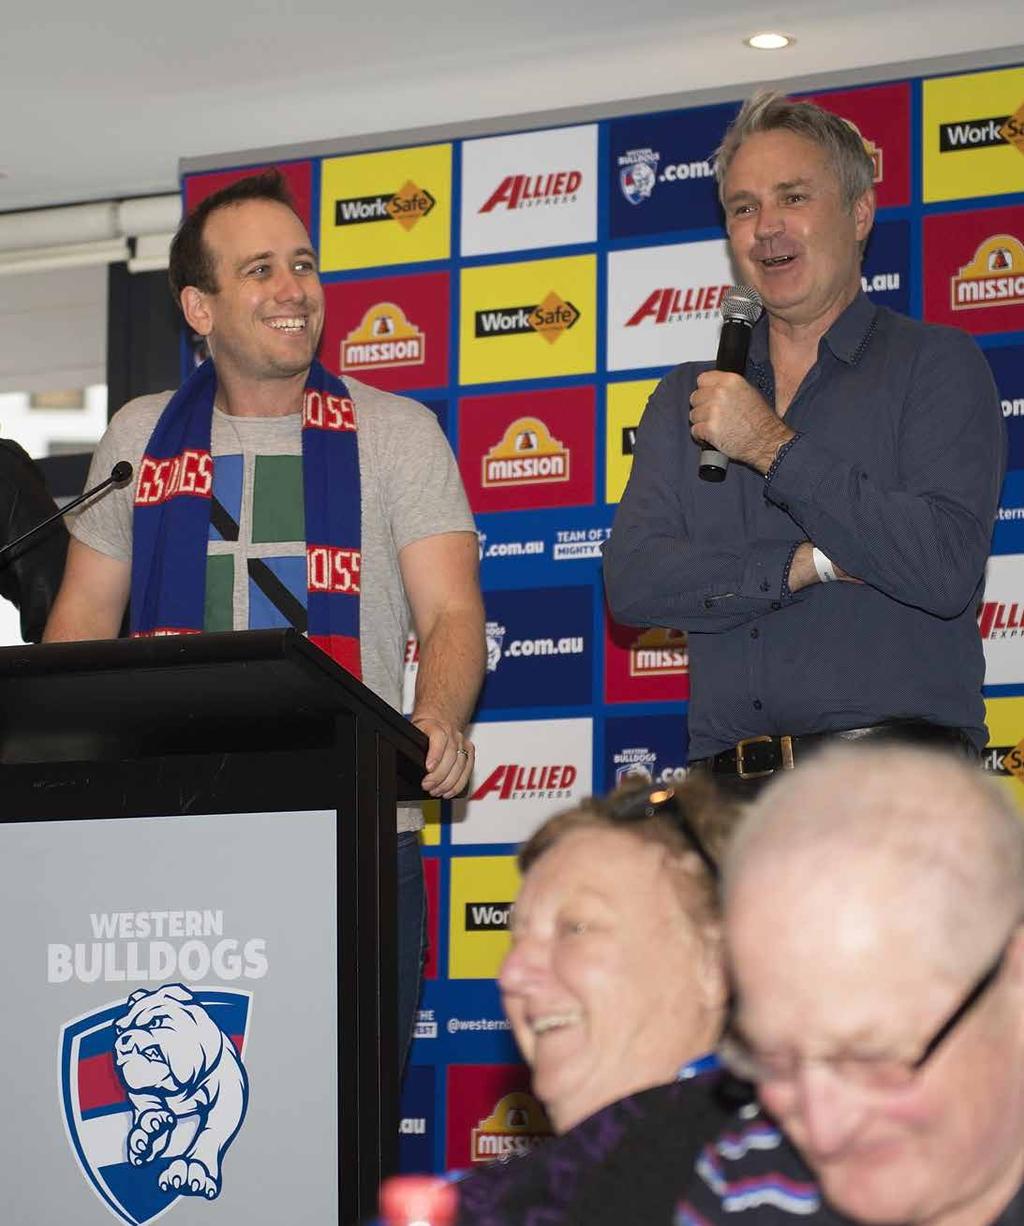 NEW Since 1979 the Top Dogs have been one of our most reputable and passionate supporter groups and for those looking to increase their level of support for the Western Bulldogs, this is a great